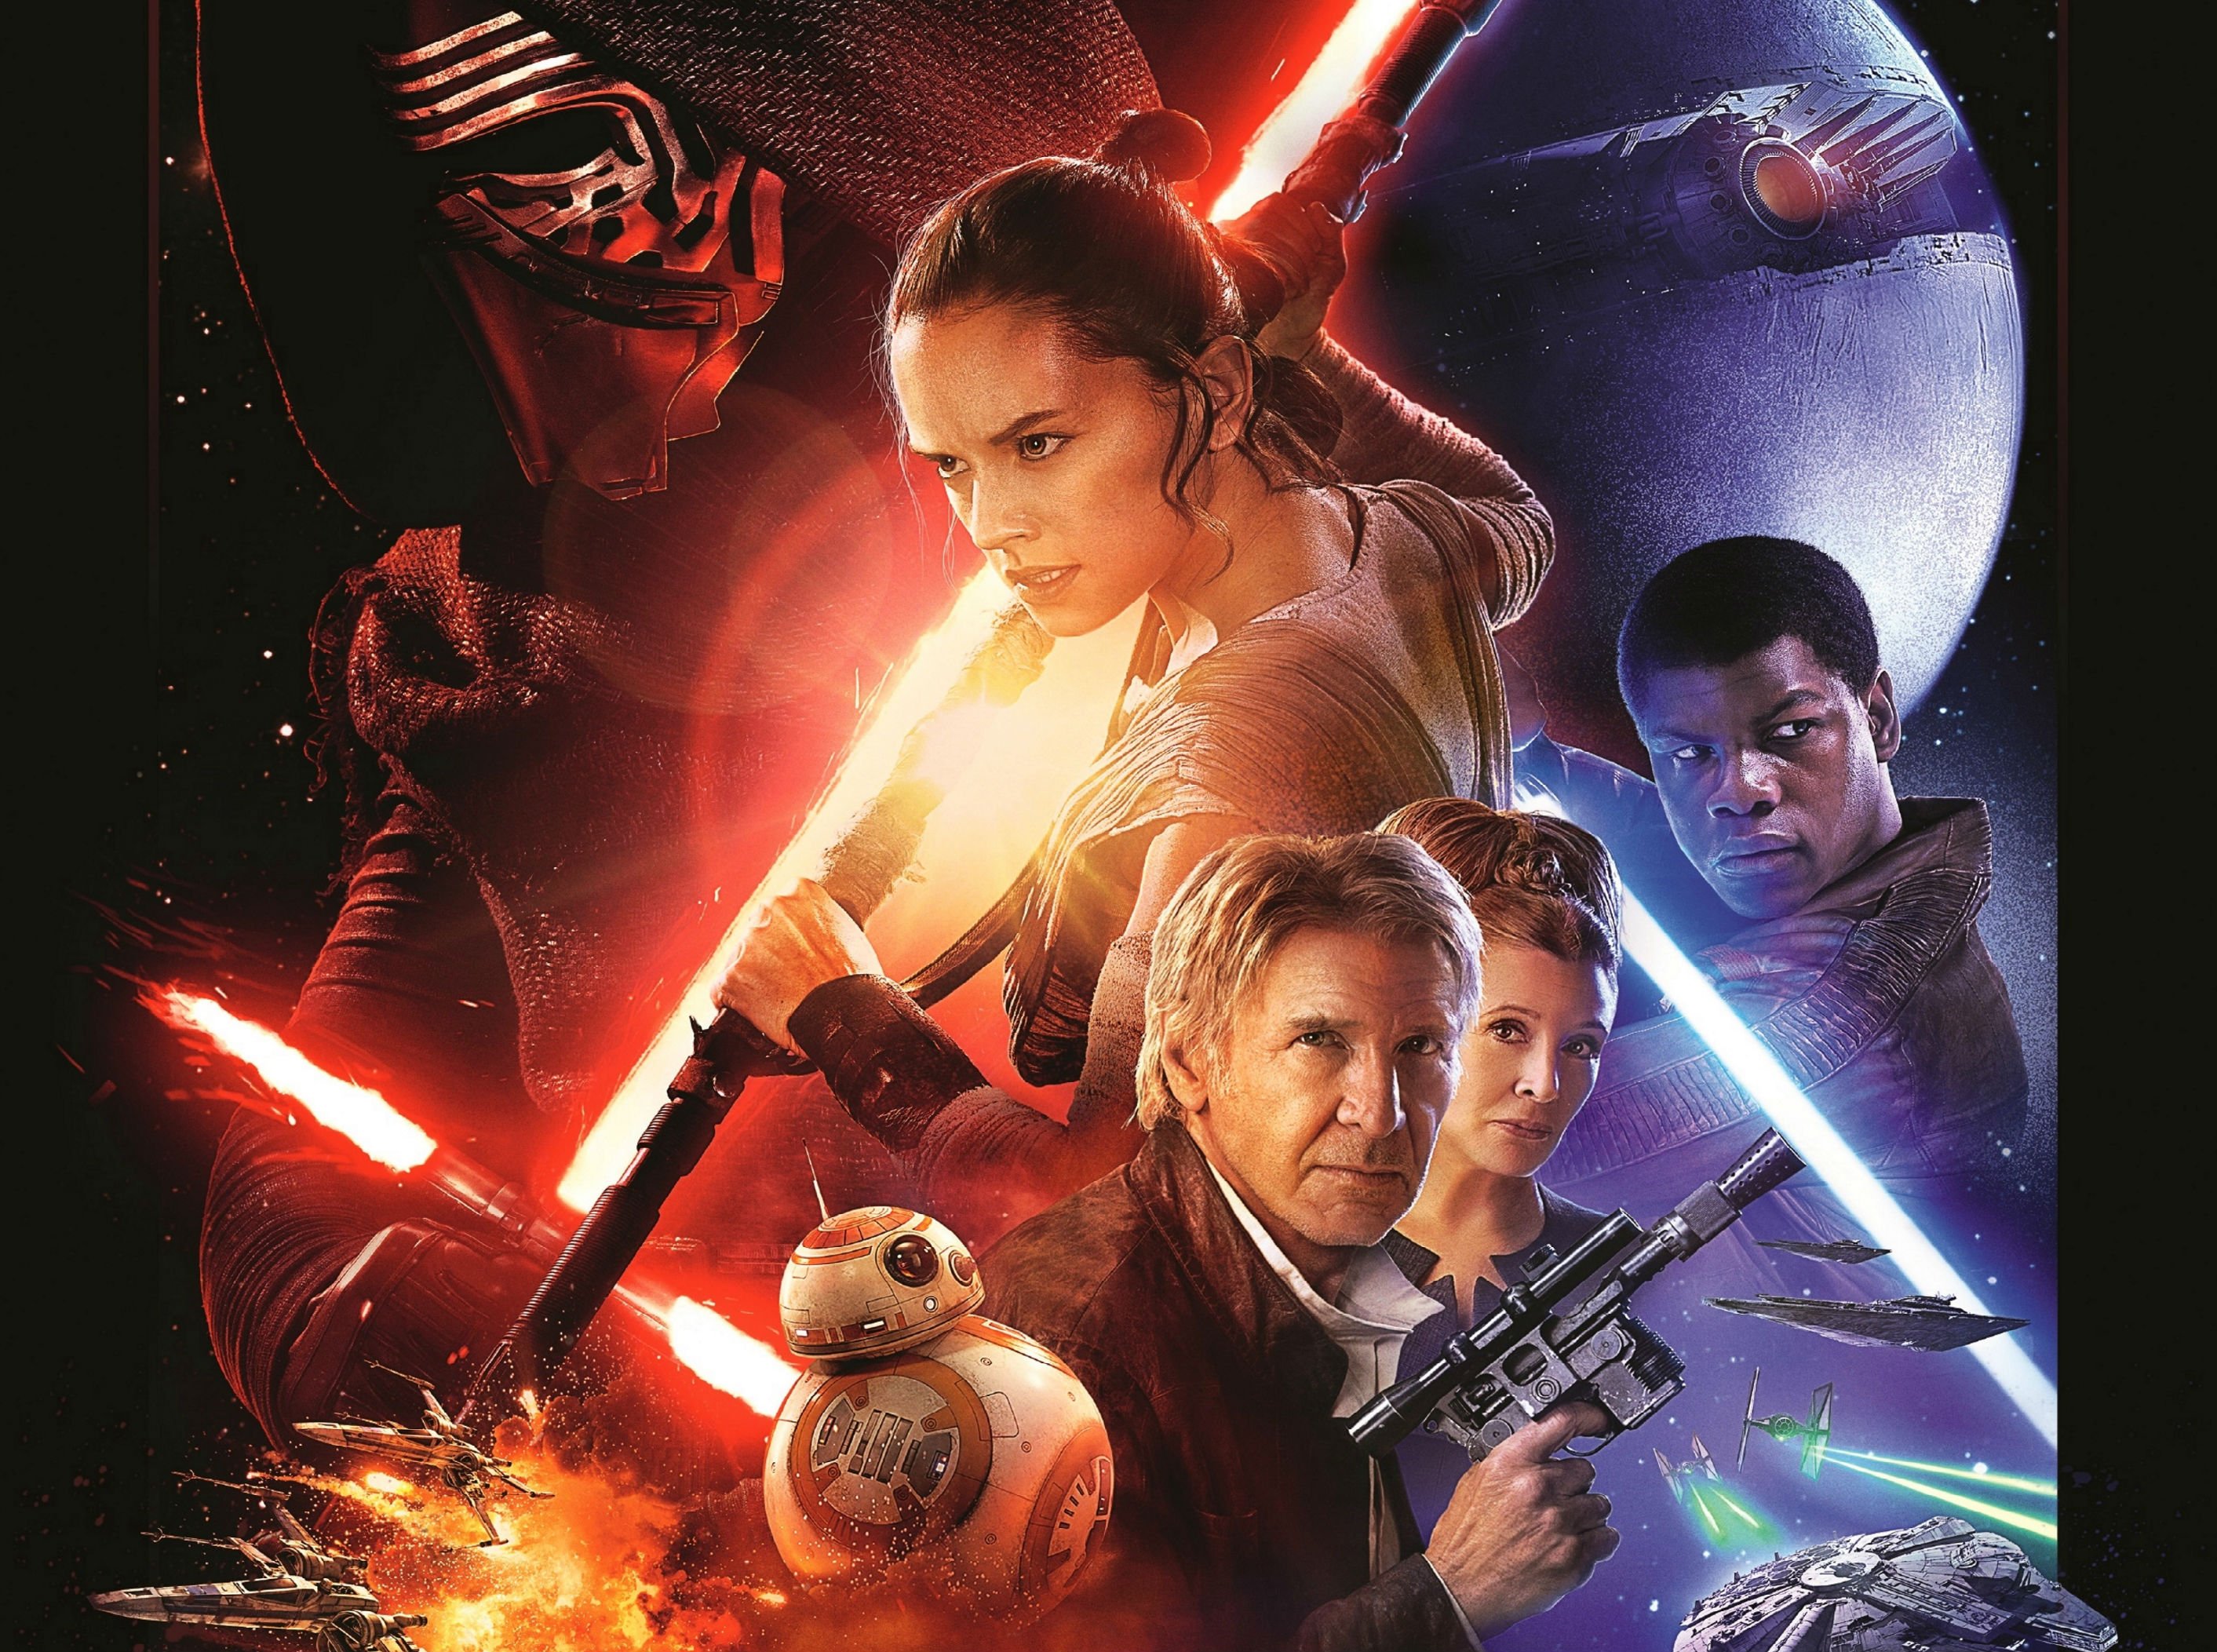 star wars the force awakens full movie download free